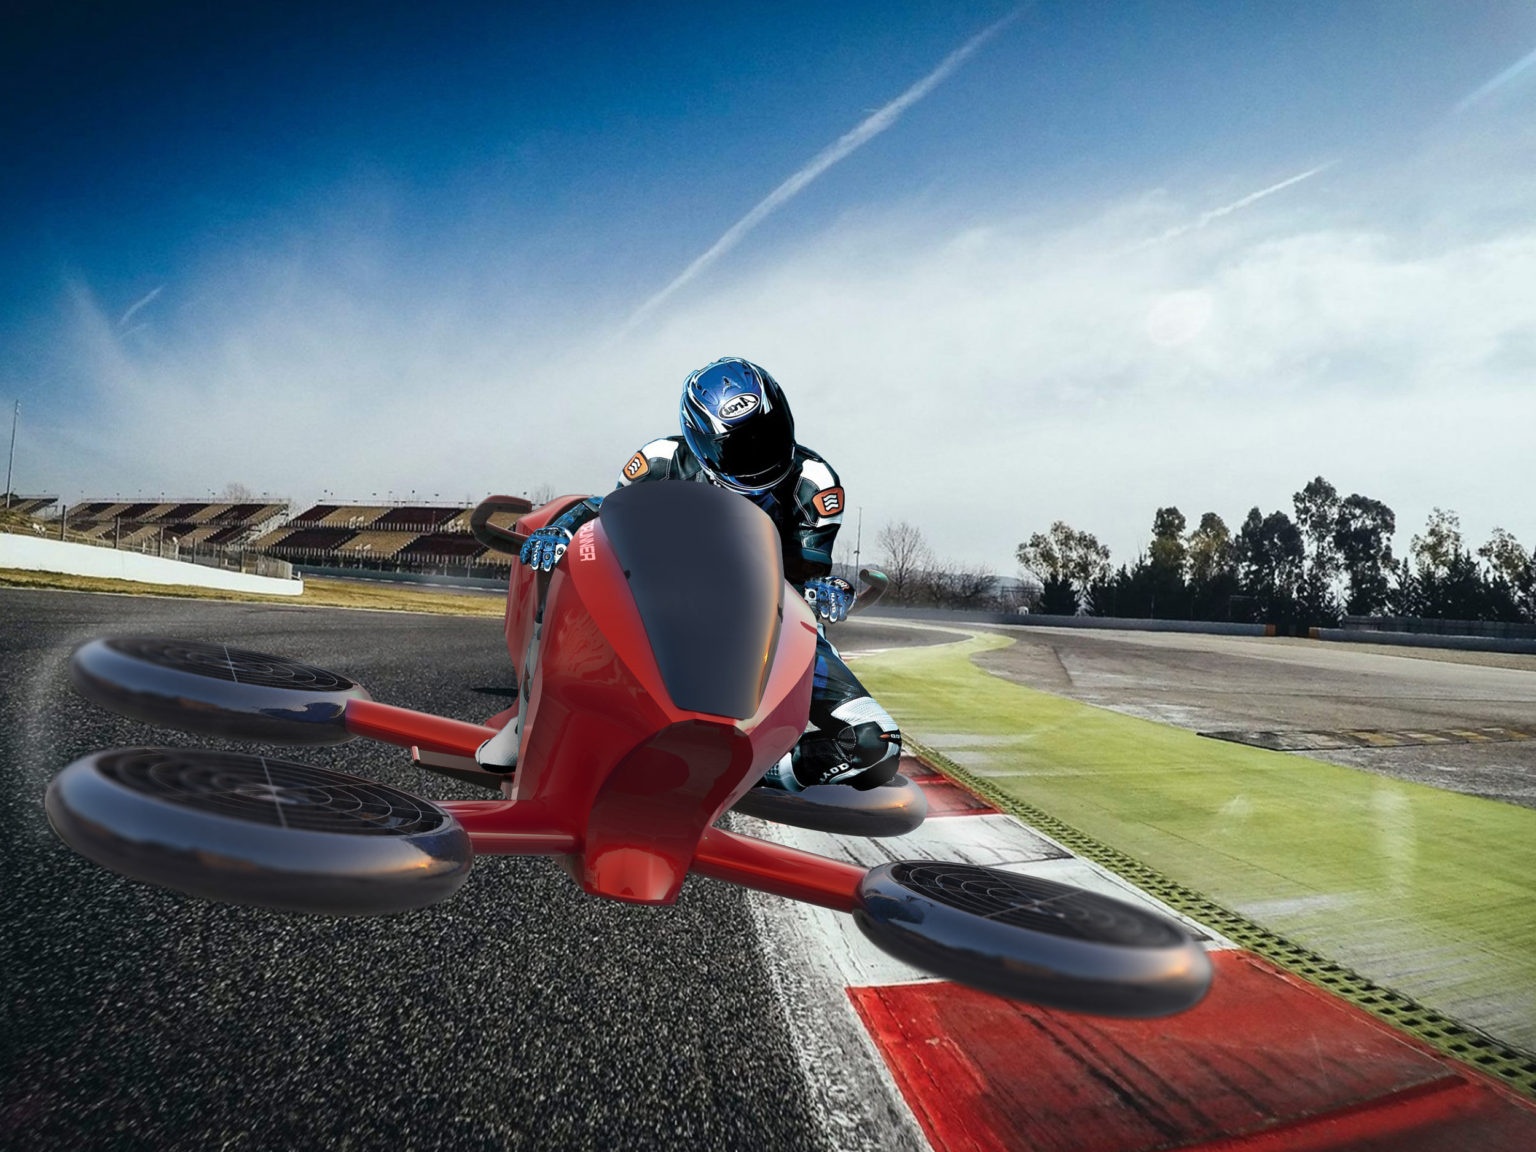 A Houston entrepreneur and investor is bullish on bringing flying motorcycles to existence.